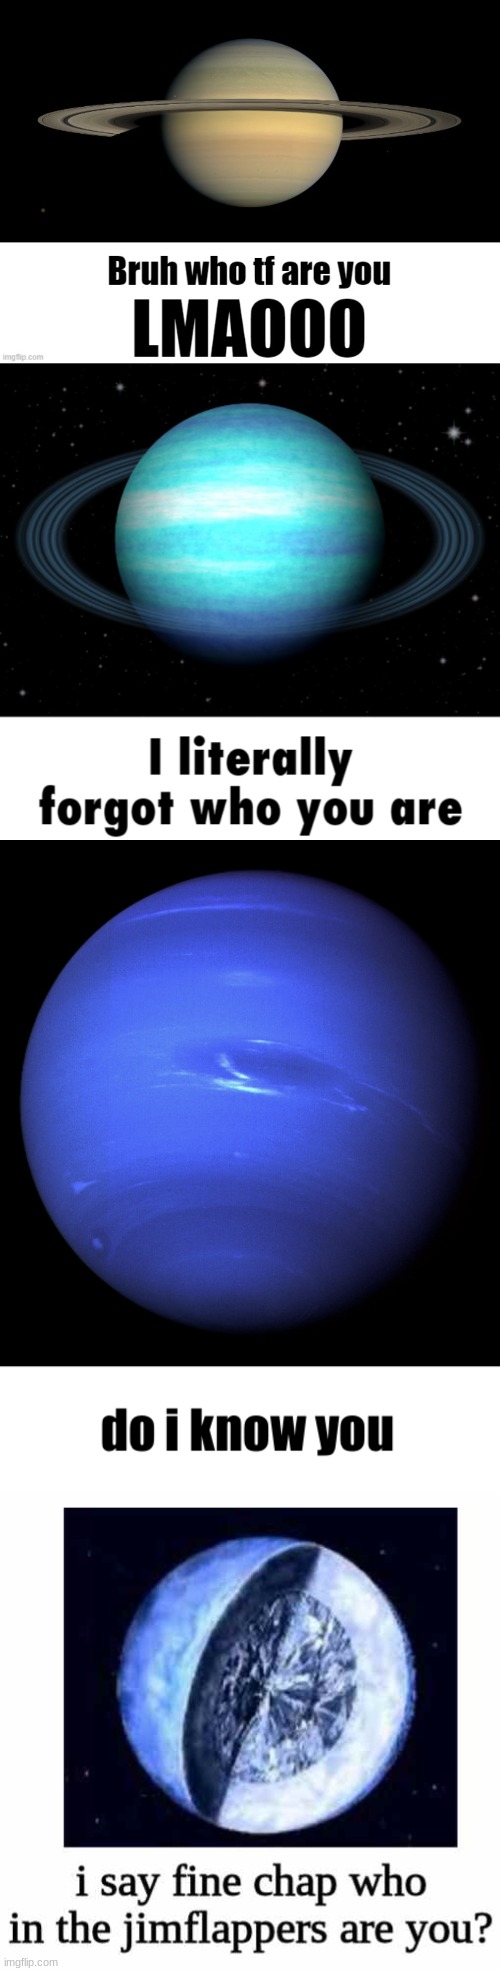 all i could find | image tagged in bruh who tf are you lmaooo,i literally forgot who you are,neptune do i know you,diamond planet who are you | made w/ Imgflip meme maker